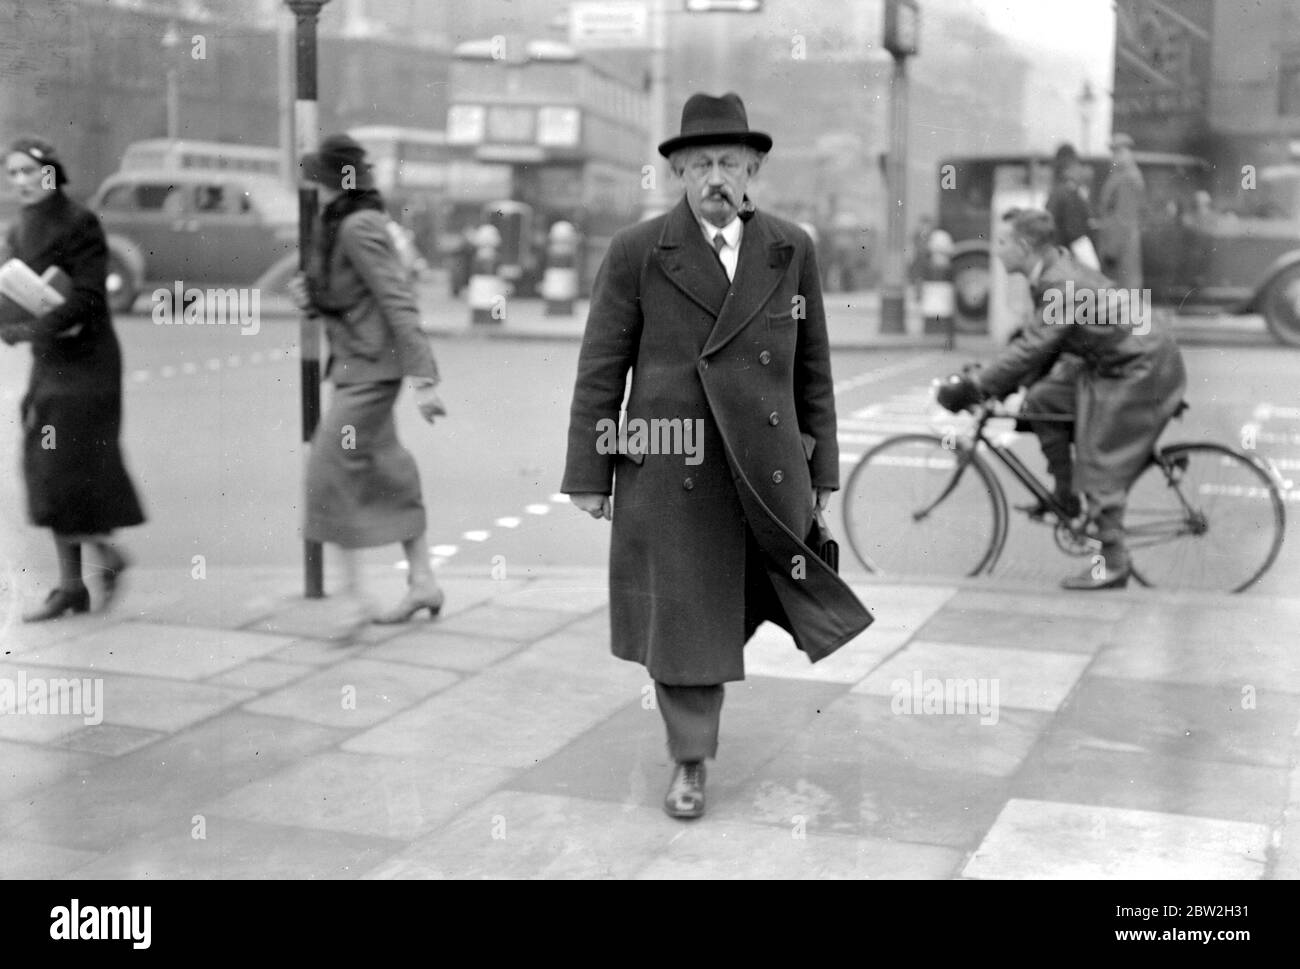 Westminster - New members arrive and Election of Leader of the Labour Party. Mr Neil Maclean. 26 November 1935 Stock Photo